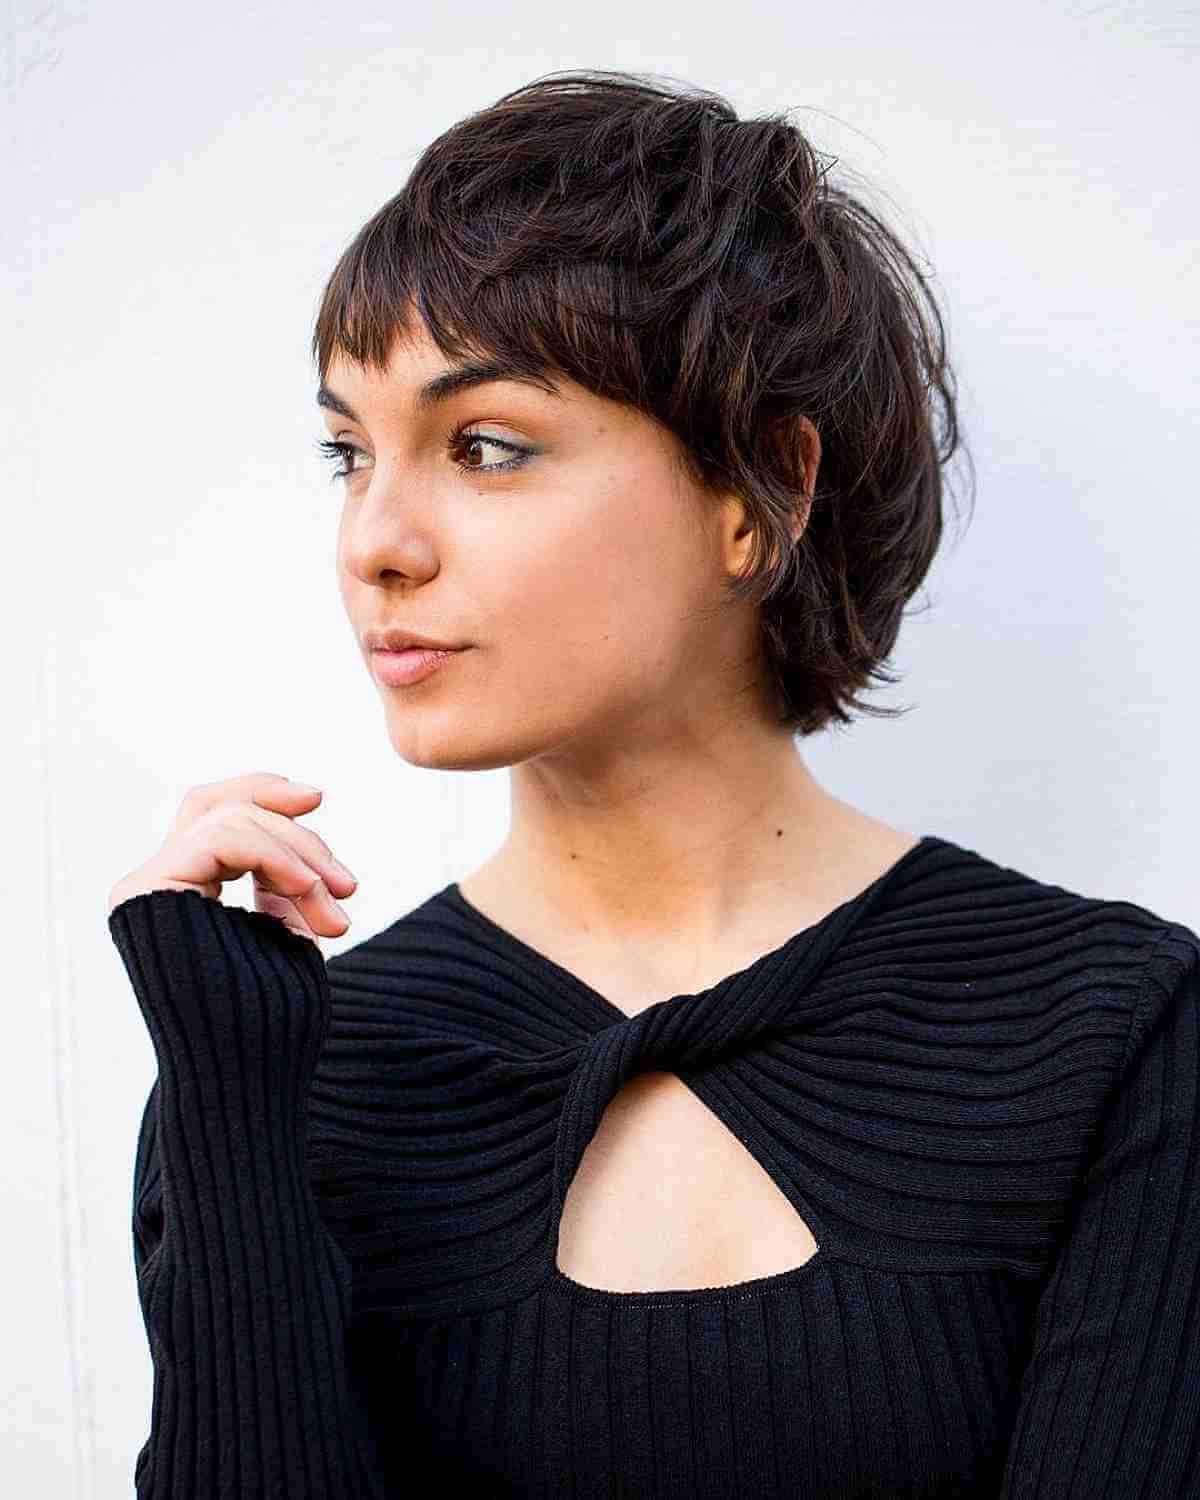 The Contemporary Pixie Haircut